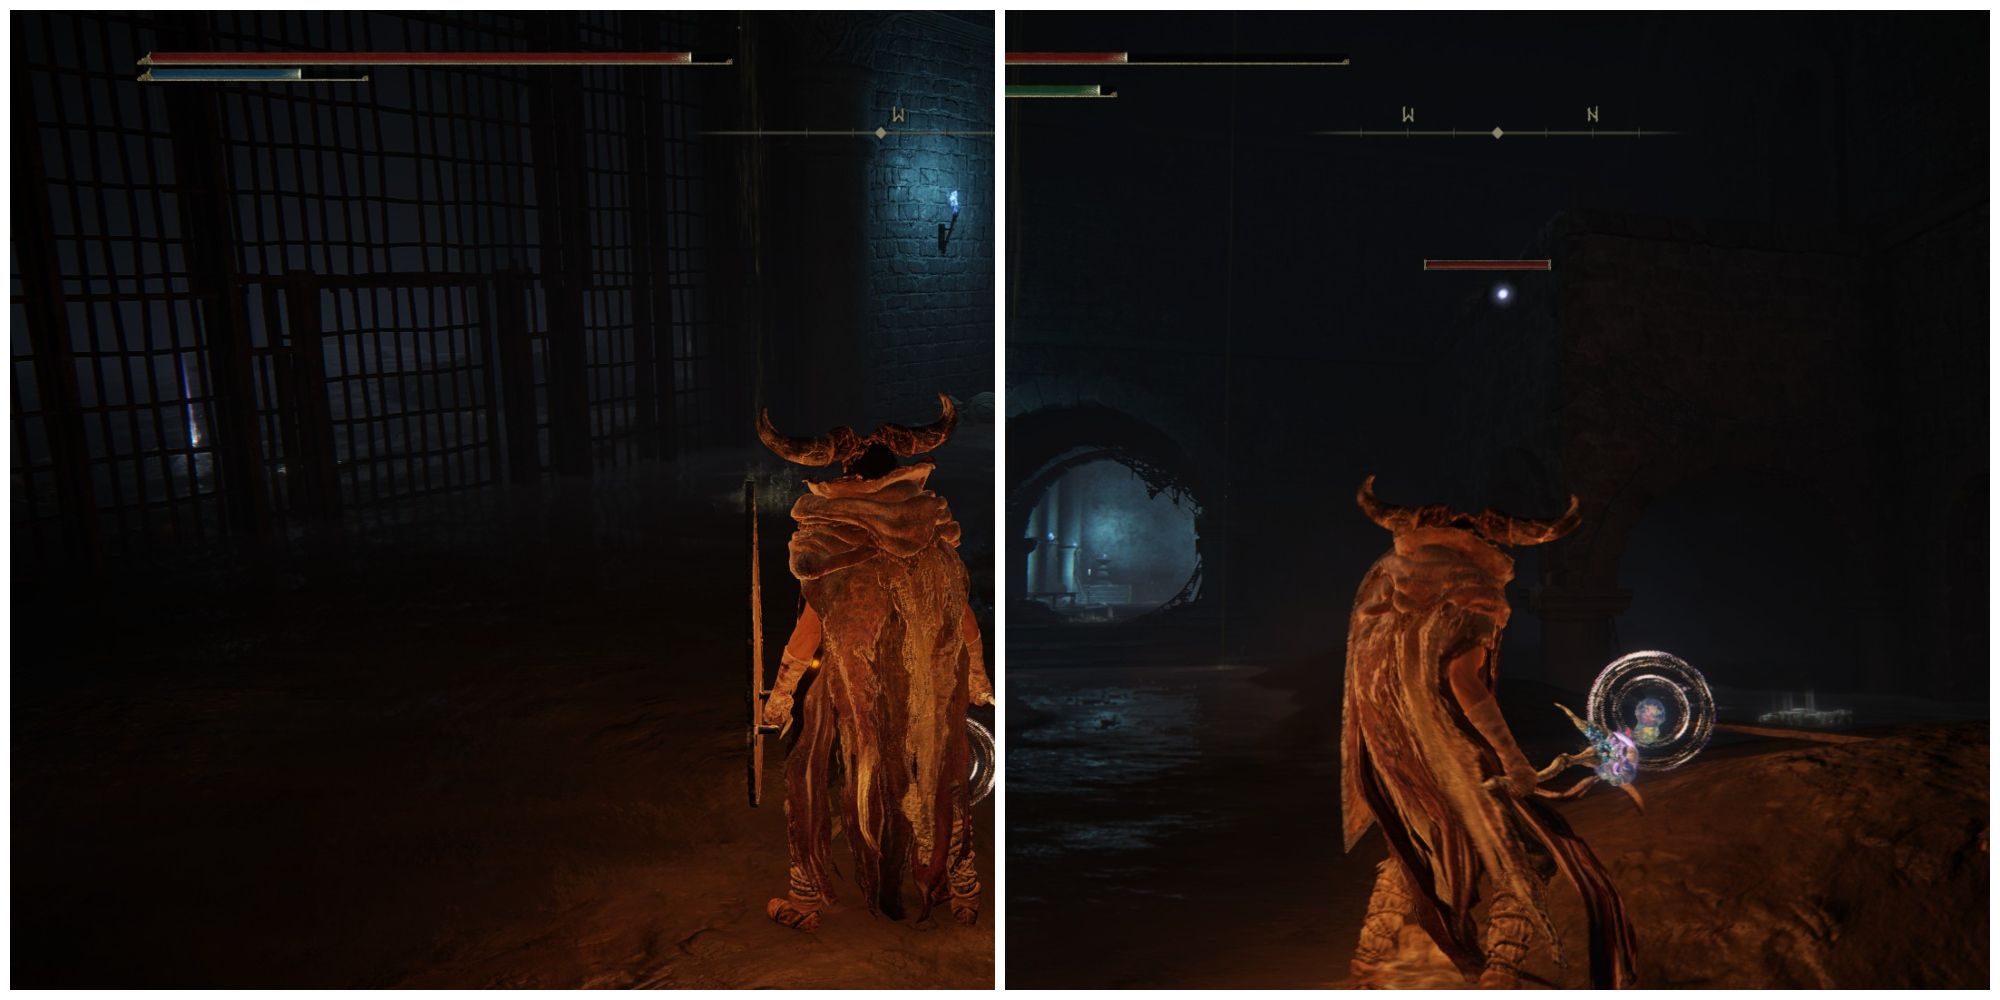 elden ring auriza size tomb items on other side of gate